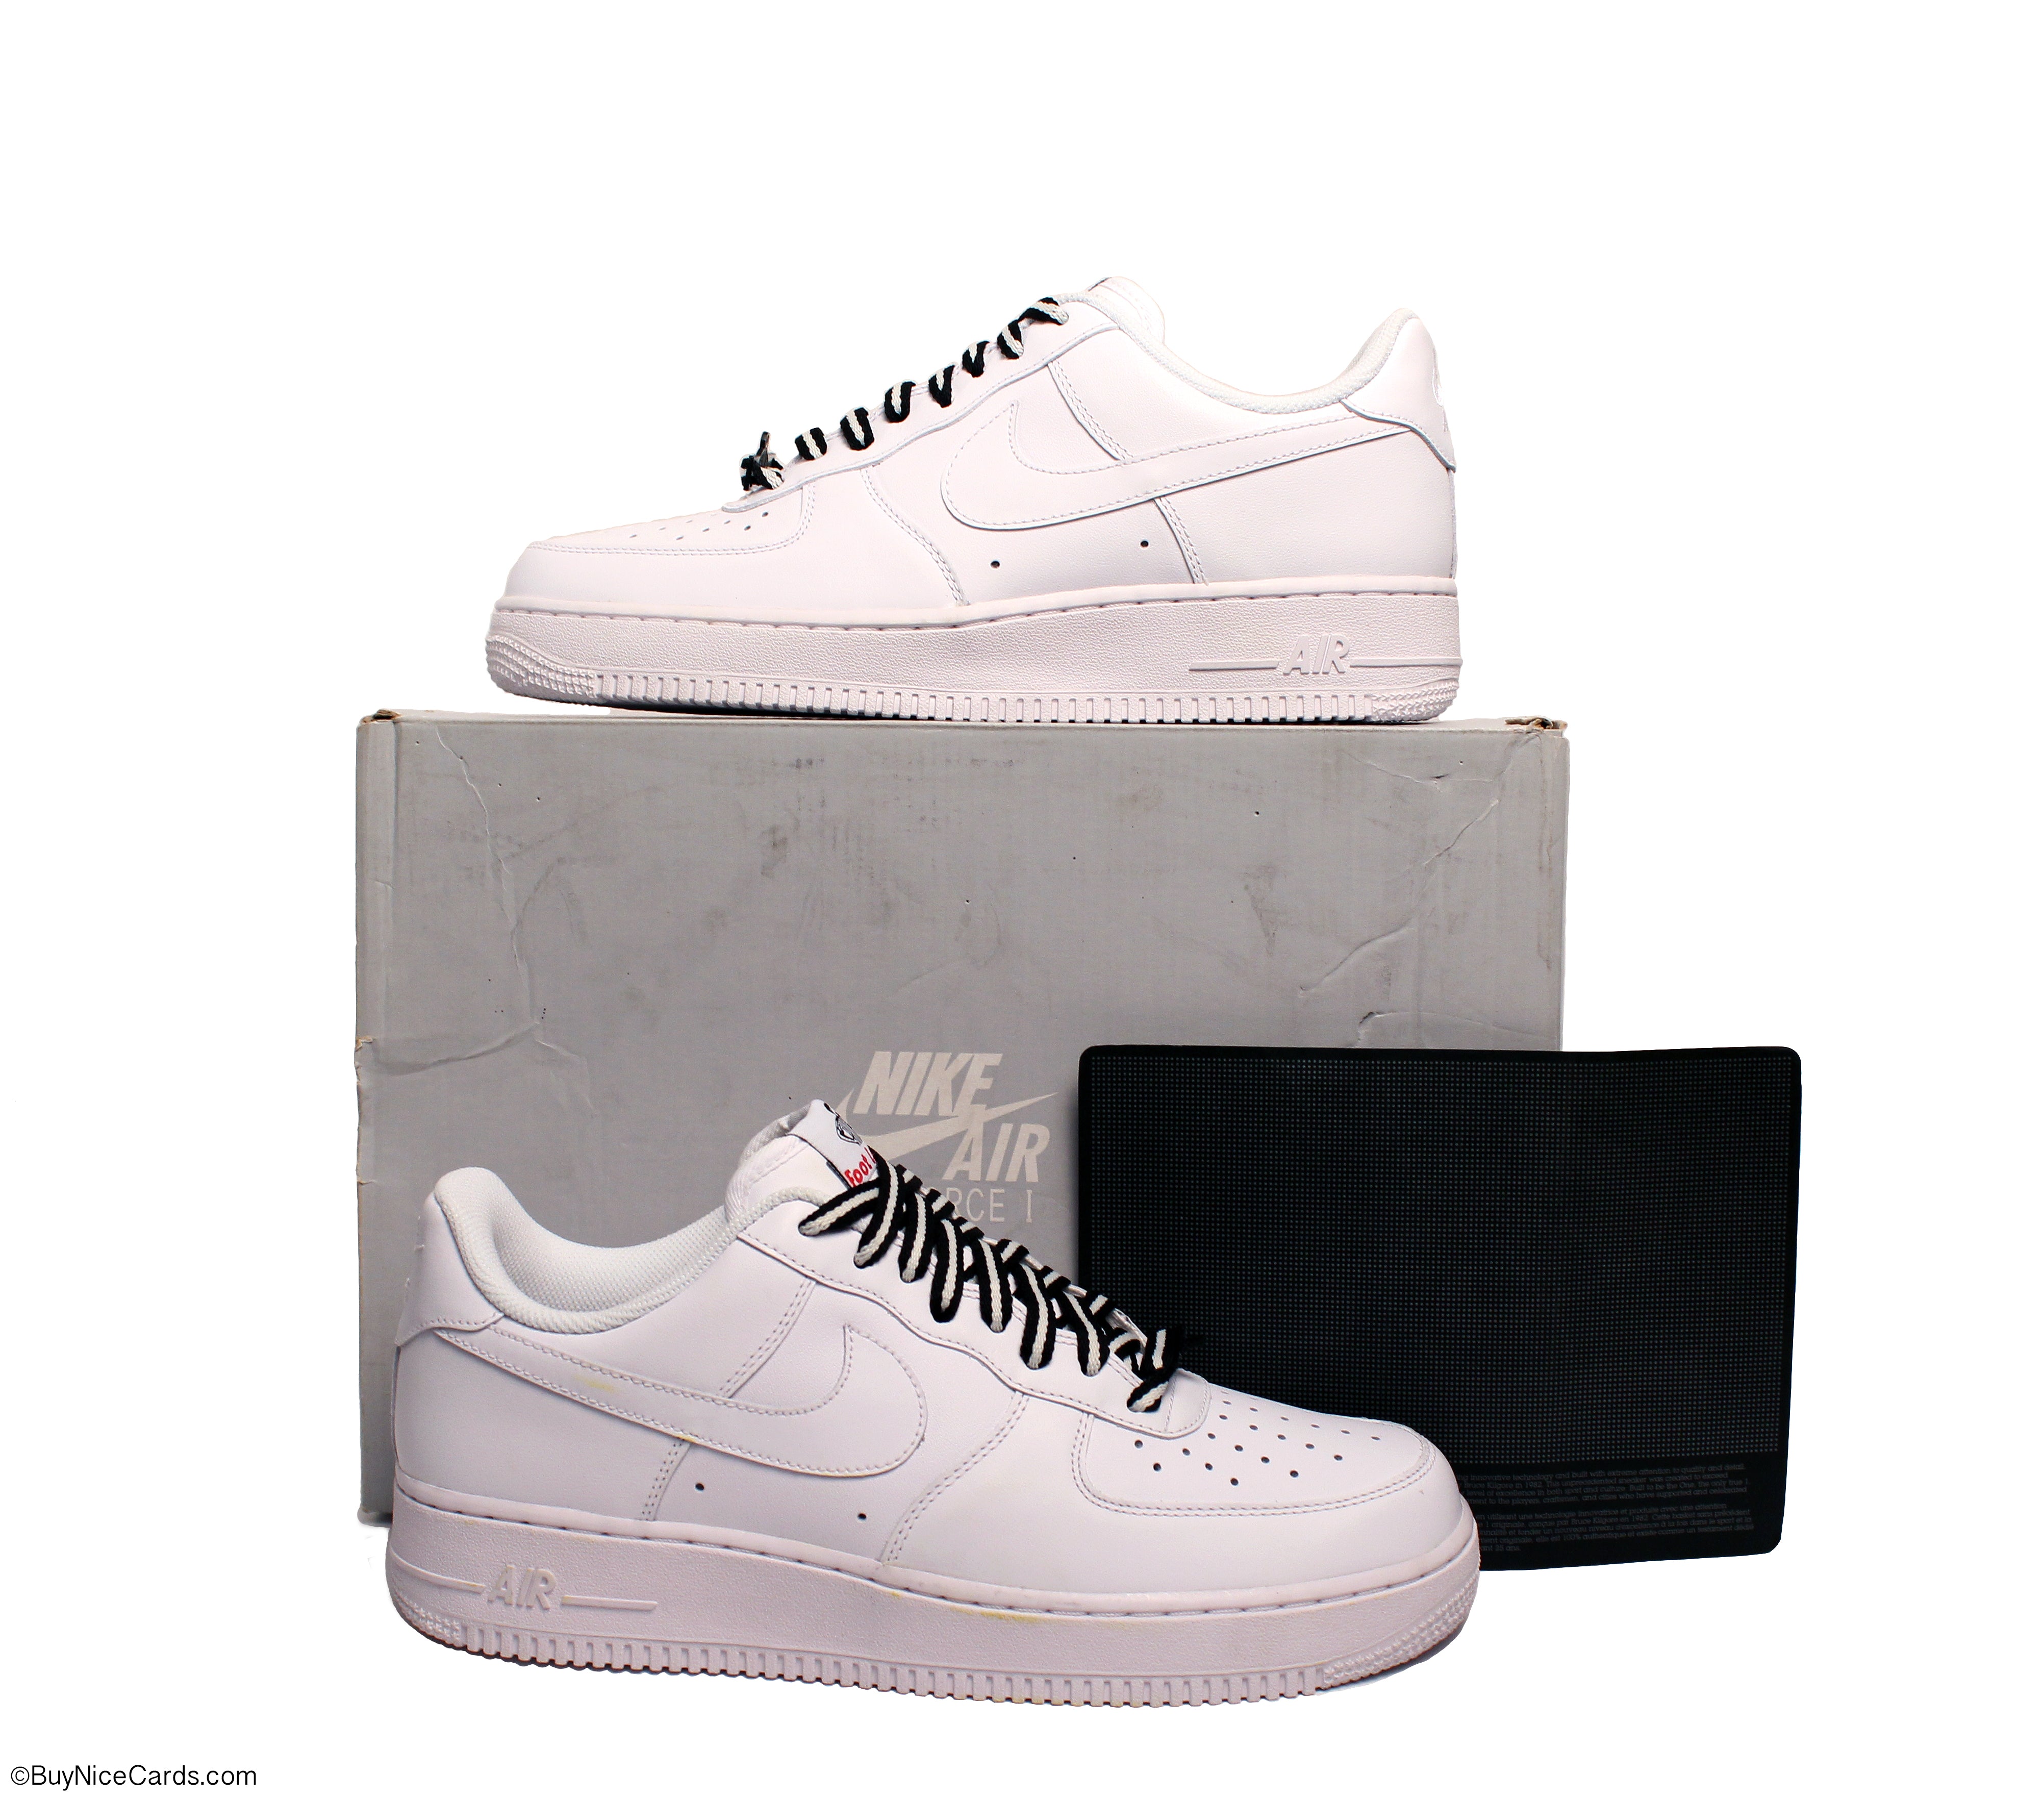 Nike '07 Air Force 1 White Locker 35th Anniversary Deadstock with Box & Authenticity Sz. 9 | Buy Nice Cards